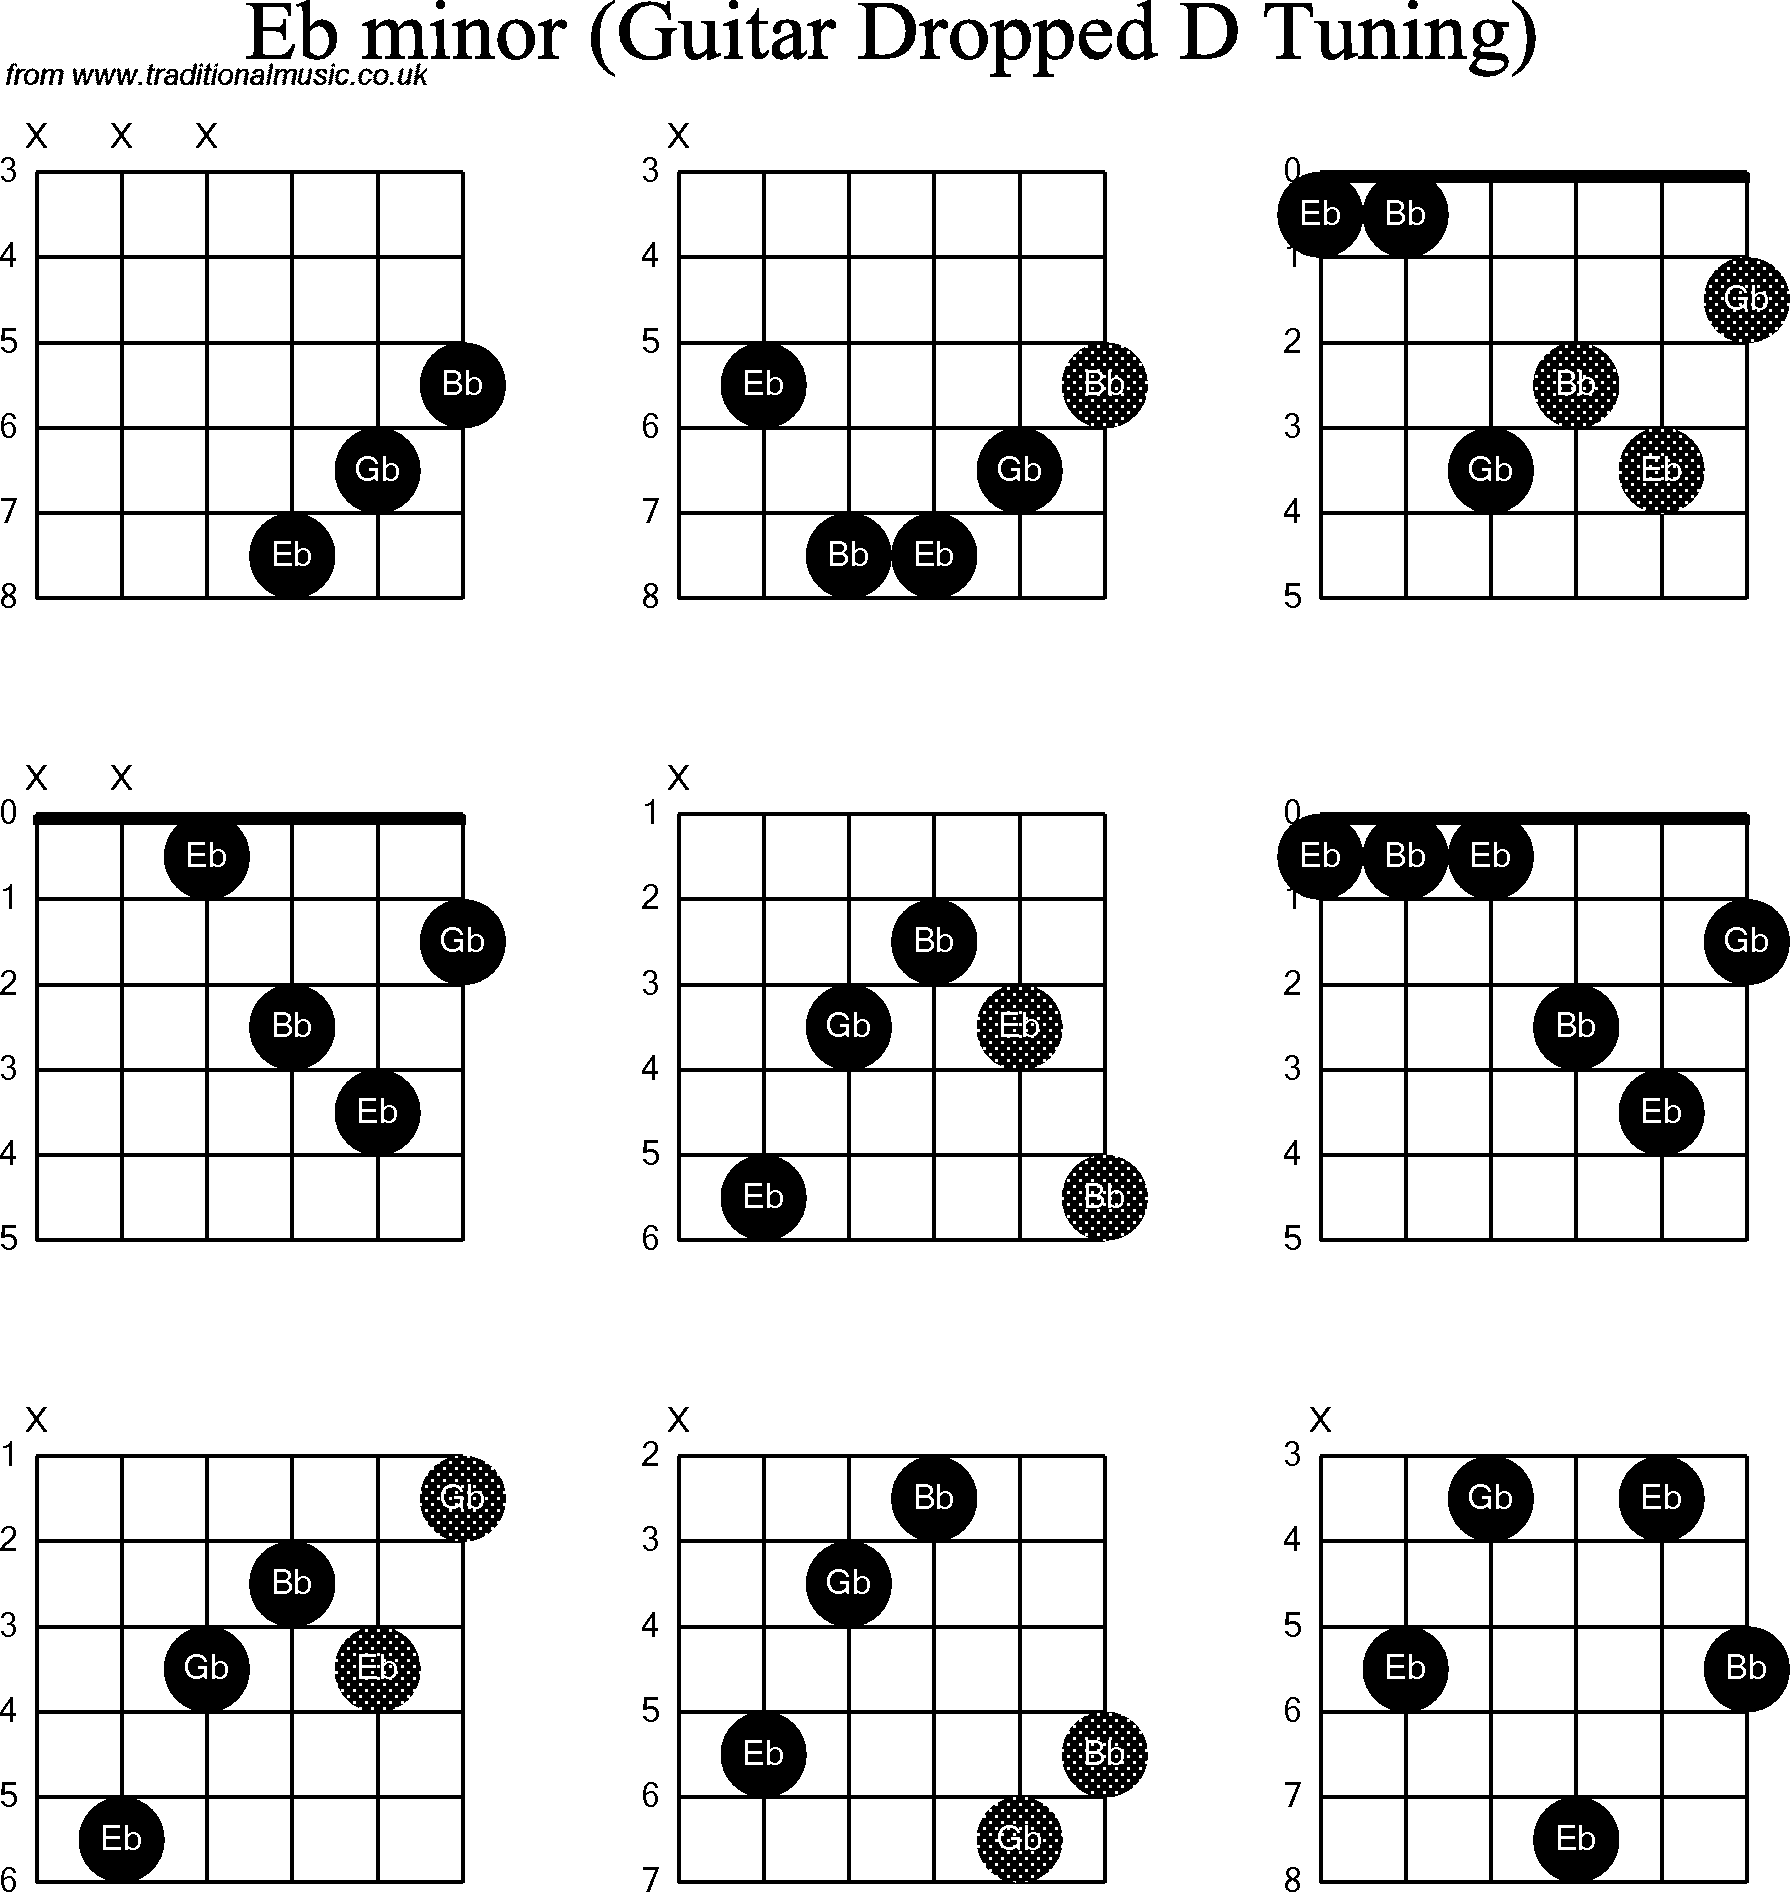 Chord diagrams for dropped D Guitar(DADGBE), Eb Minor